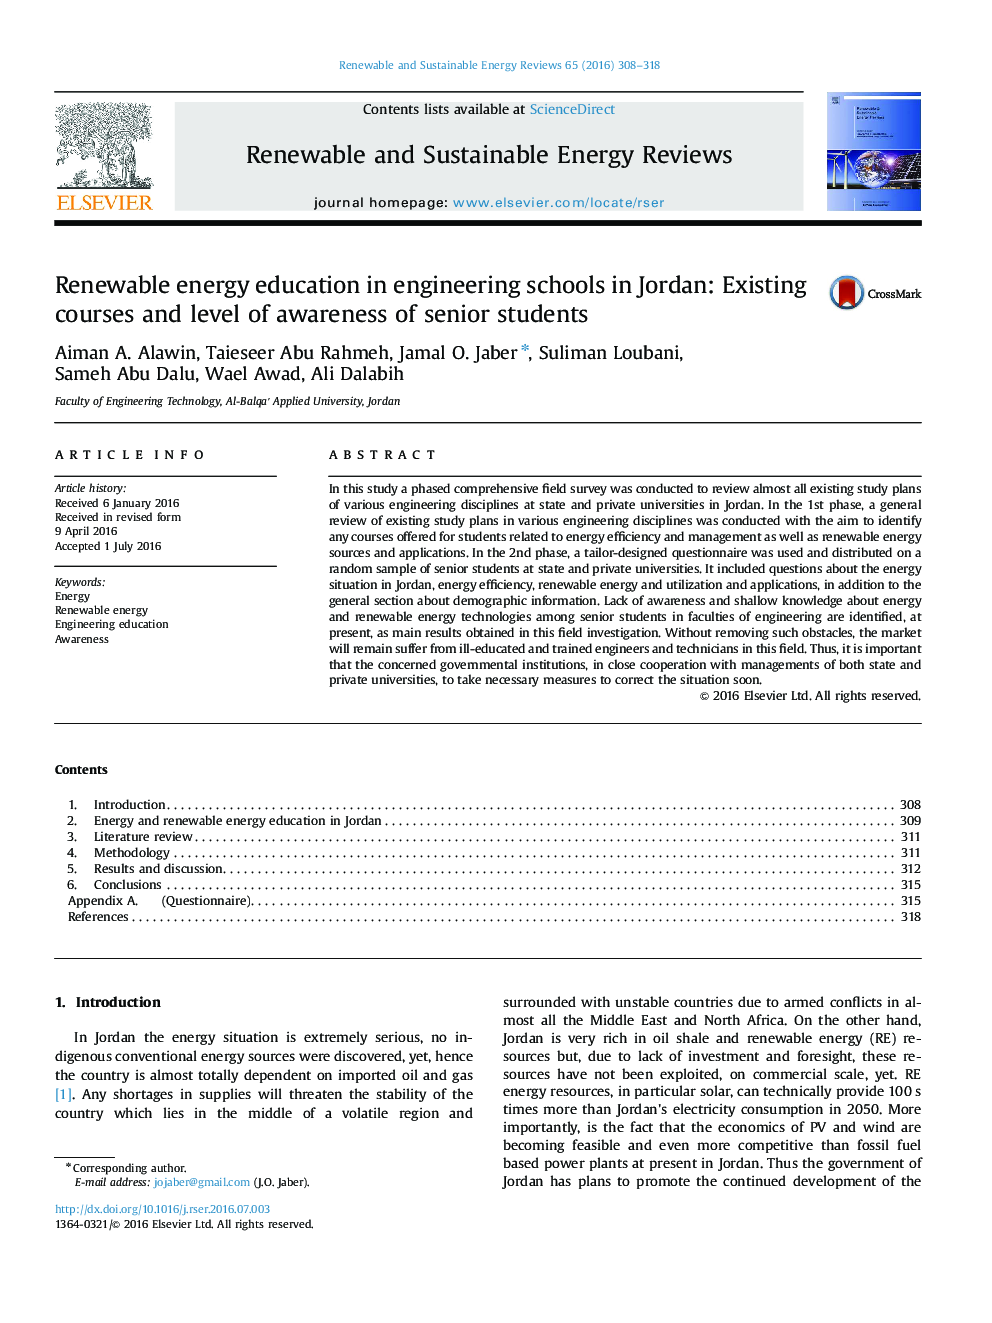 Renewable energy education in engineering schools in Jordan: Existing courses and level of awareness of senior students